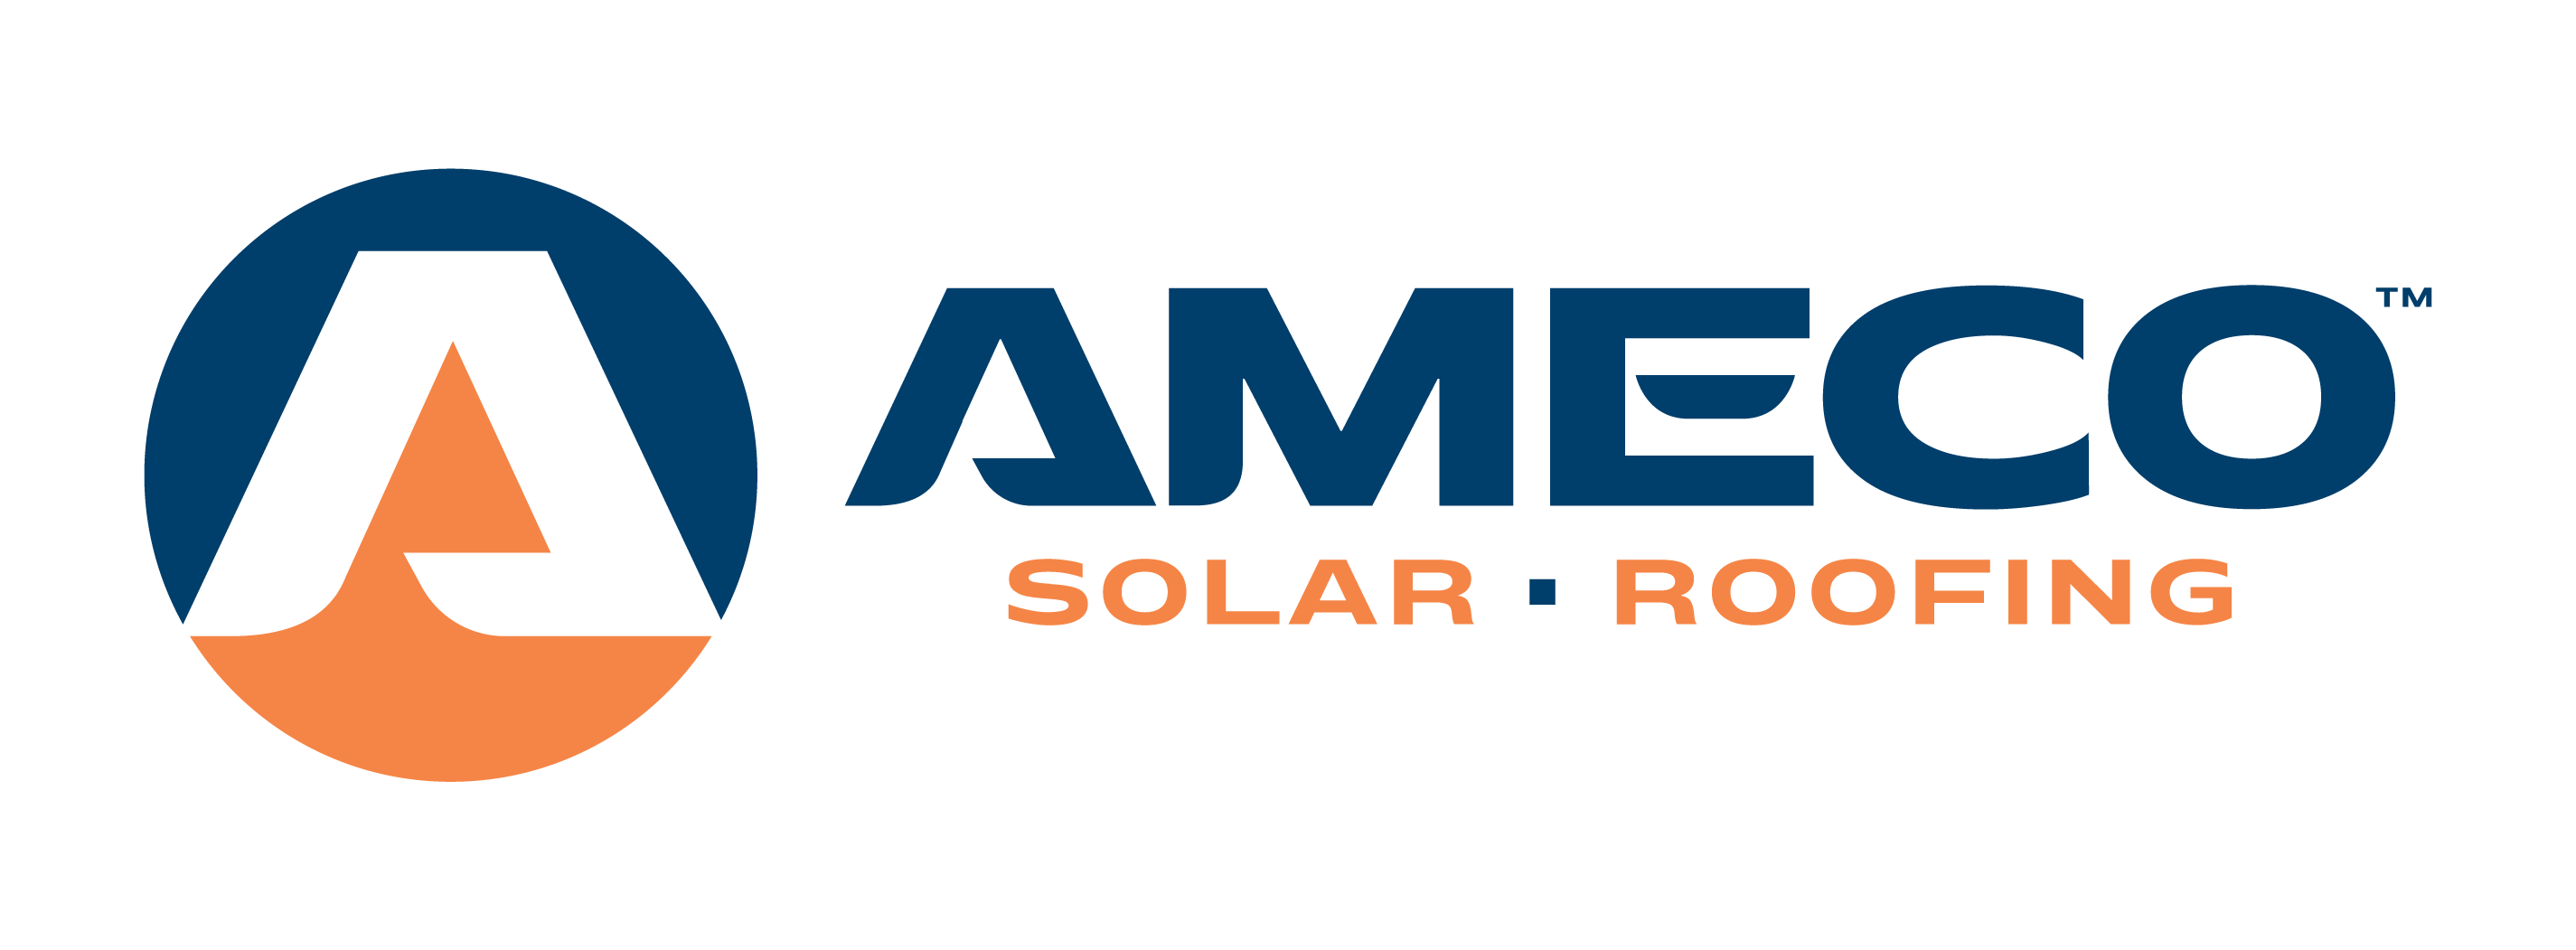 AMECO Solar & Roofing logo